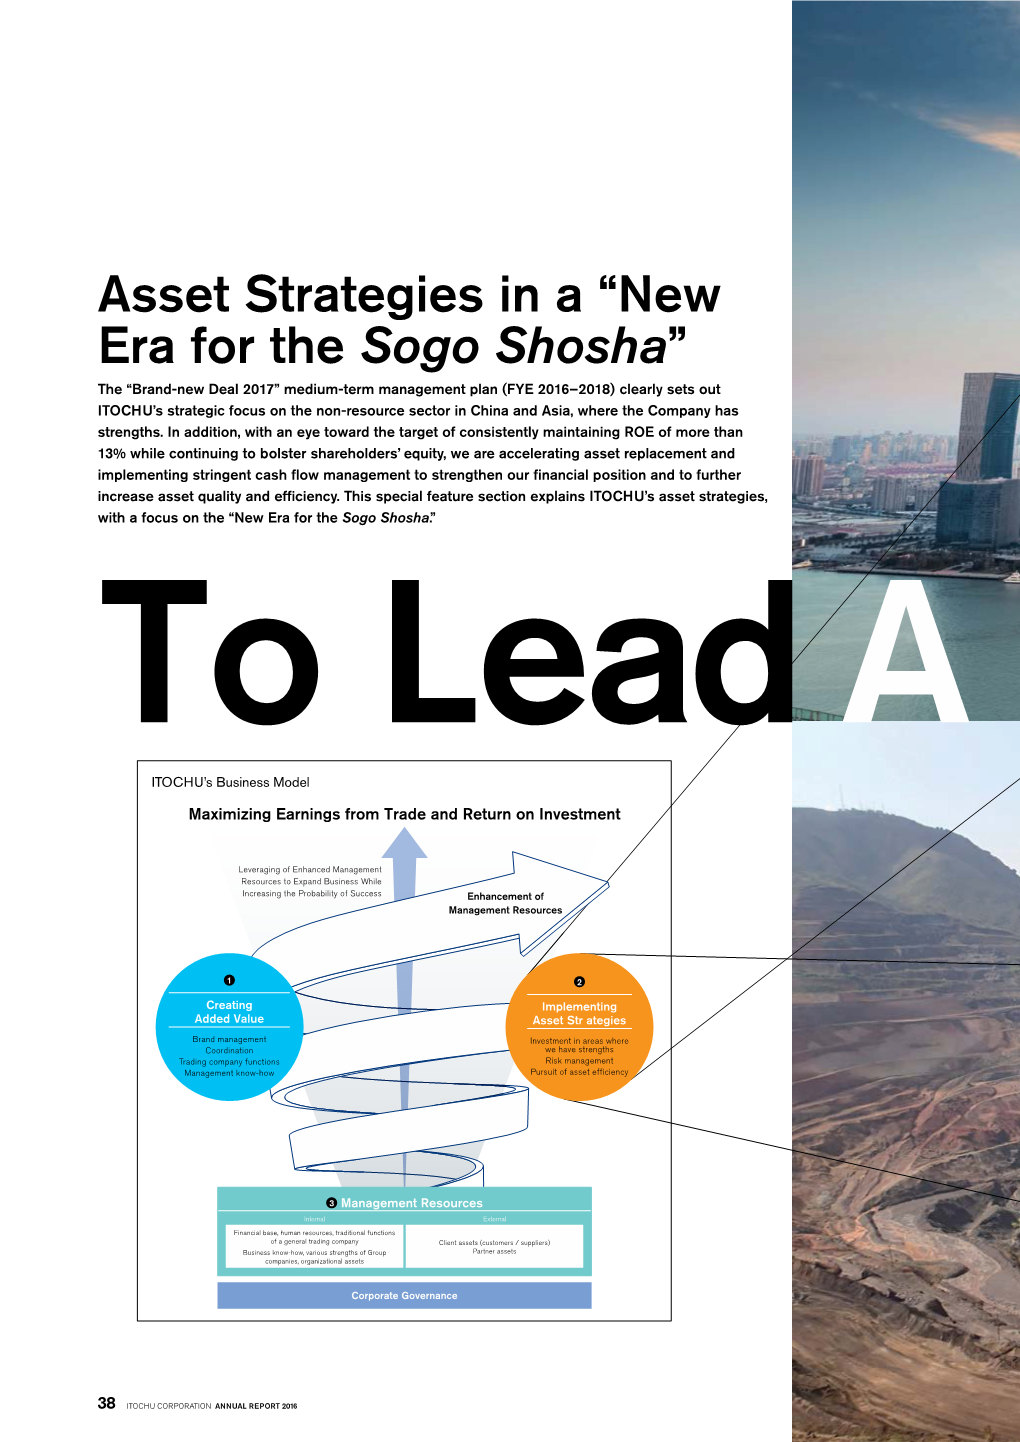 Asset Strategies in a “New Era for the Sogo Shosha”